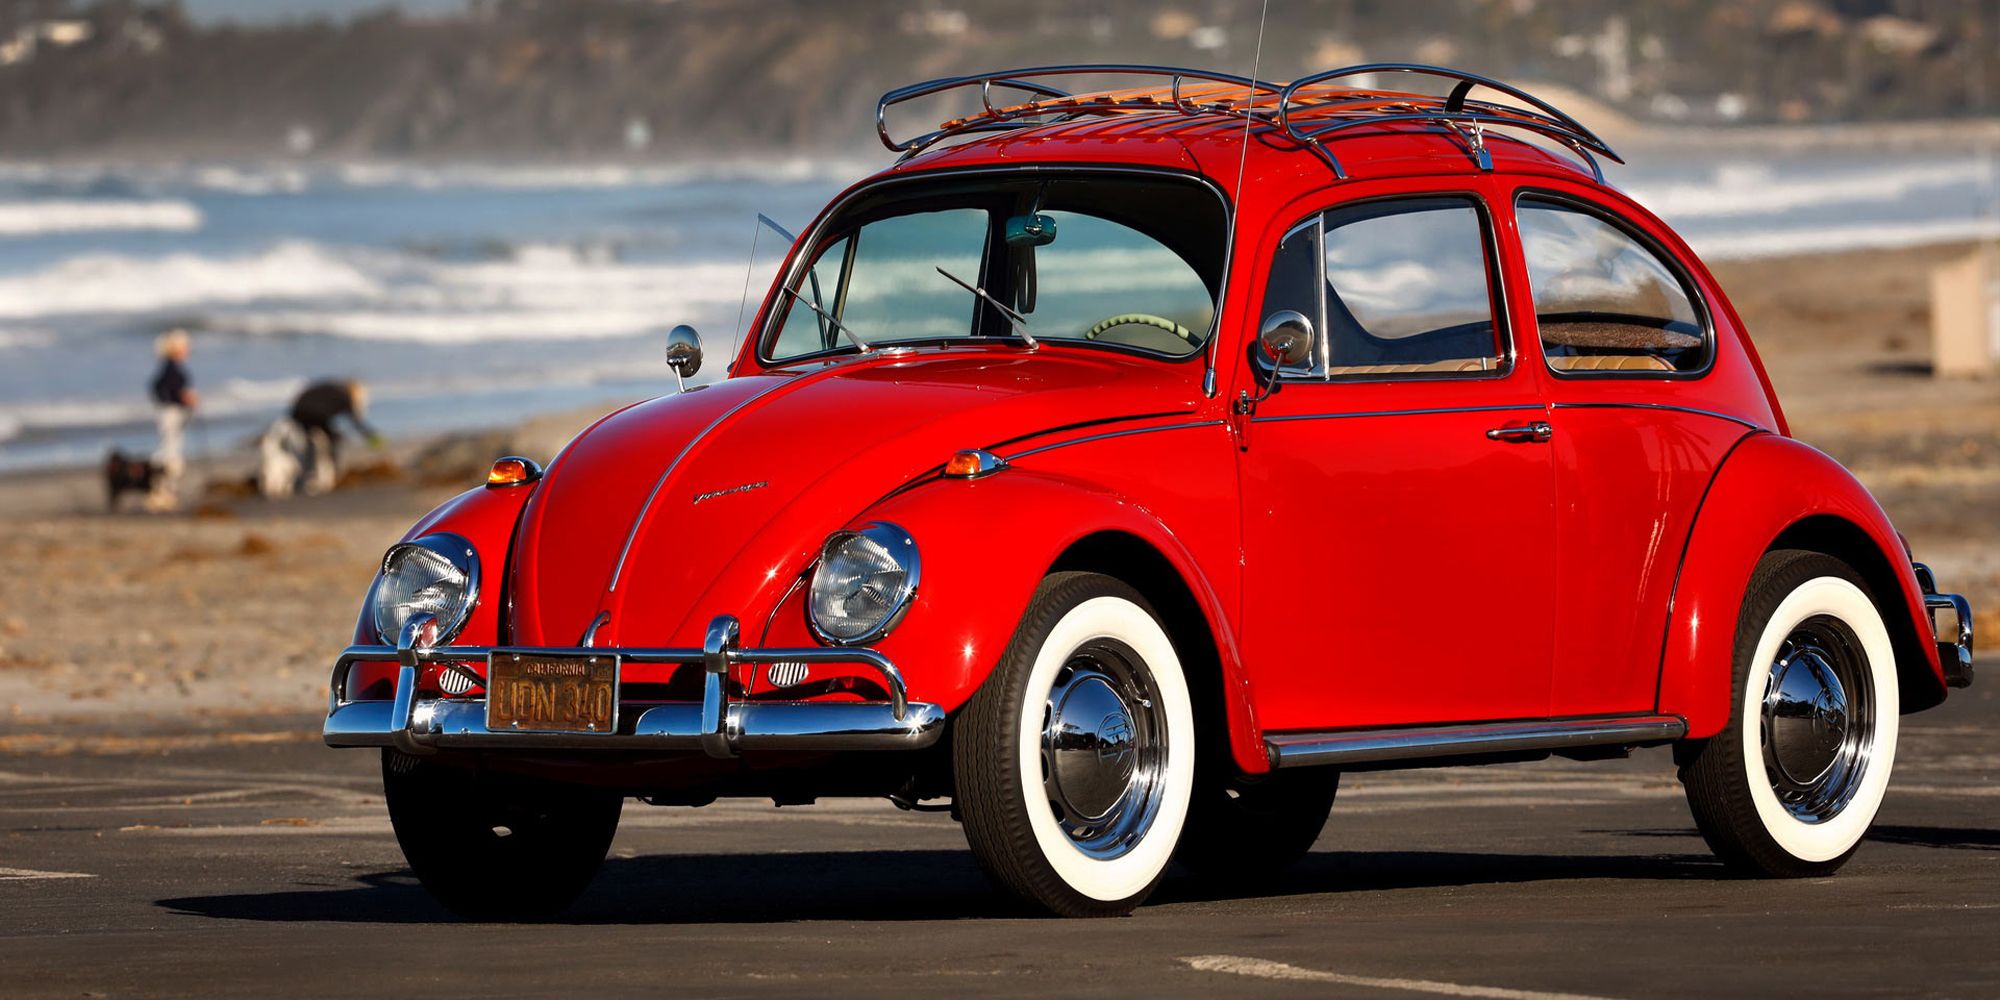 A red Beetle with a roof rack